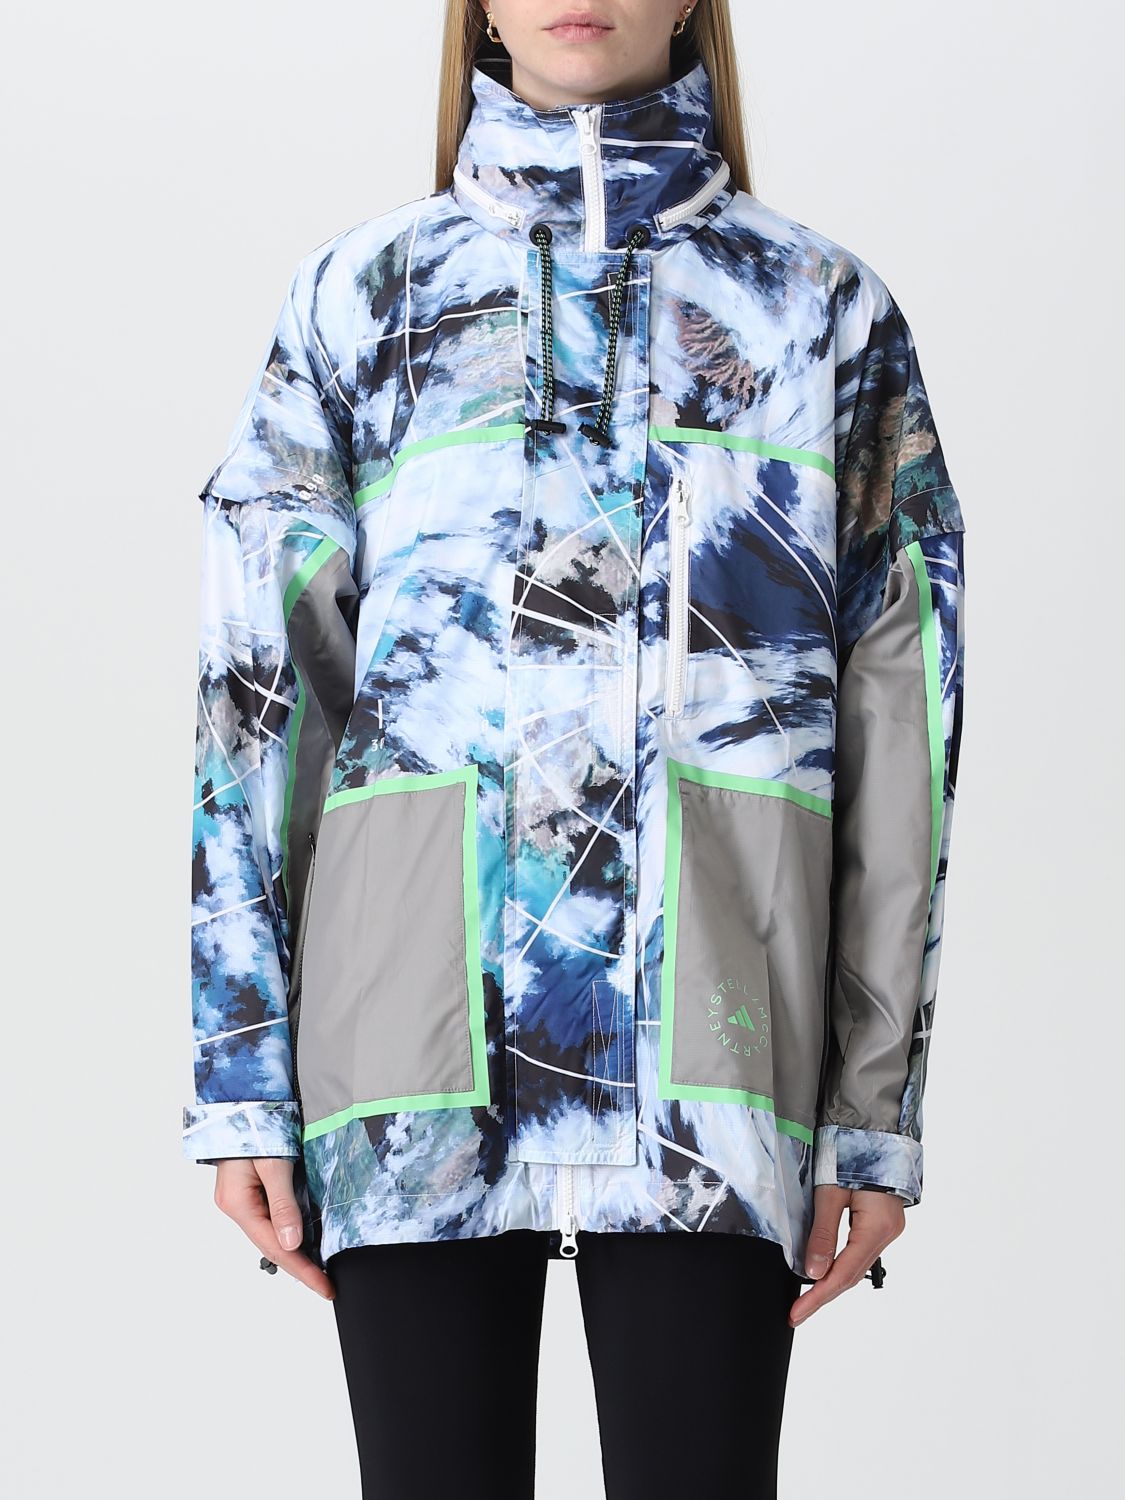 Adidas By Stella Mccartney Oversize Multicolor Jacket In White